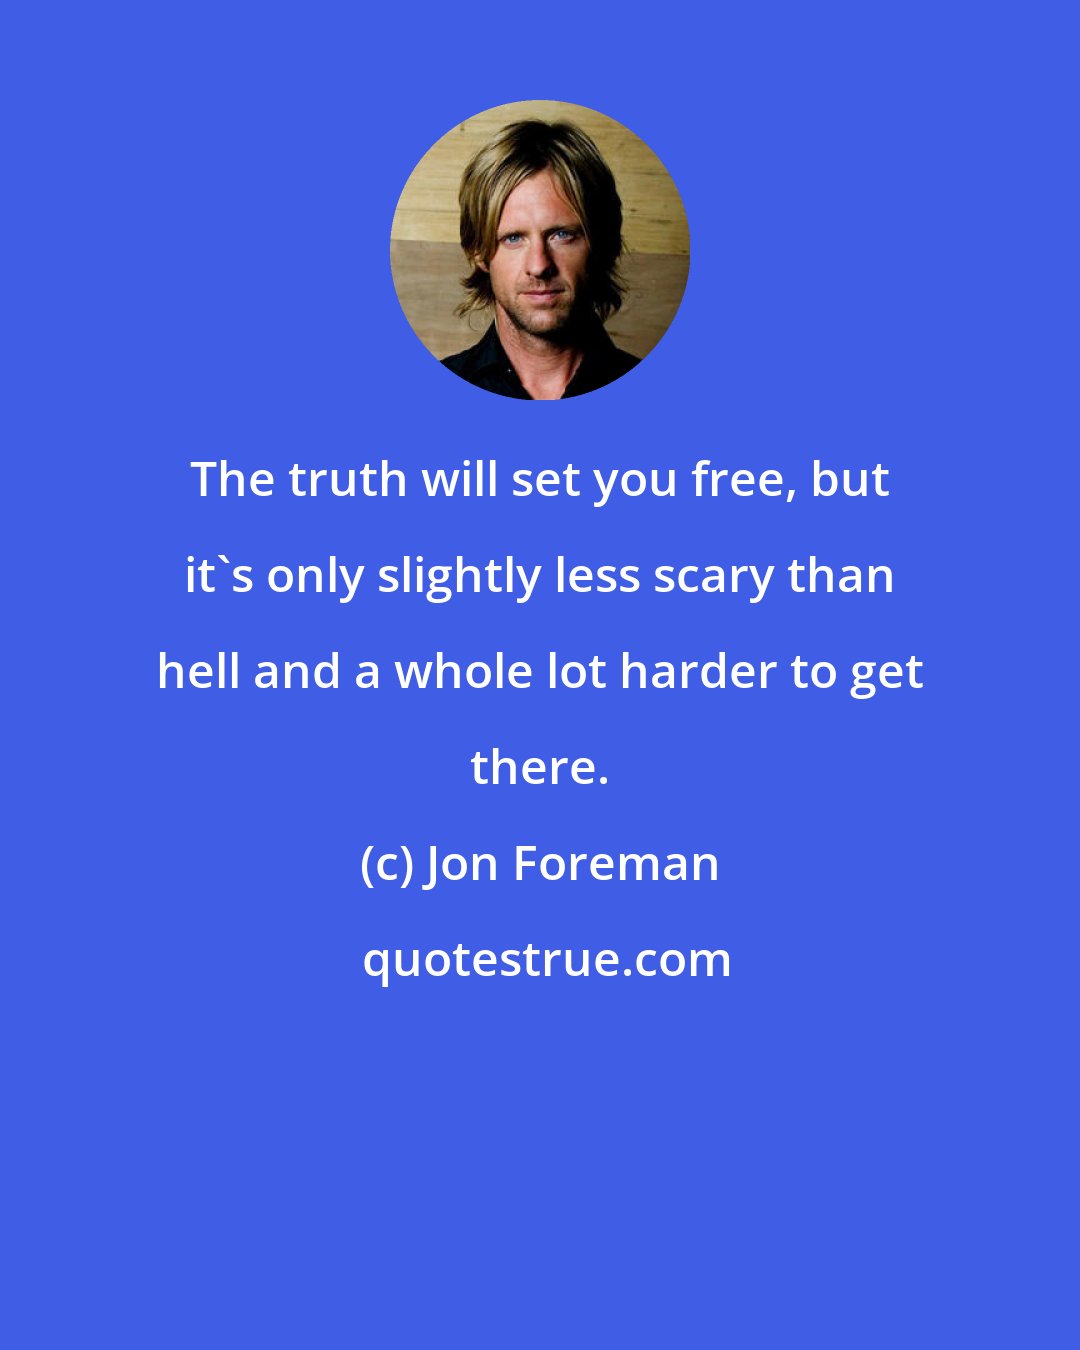 Jon Foreman: The truth will set you free, but it's only slightly less scary than hell and a whole lot harder to get there.